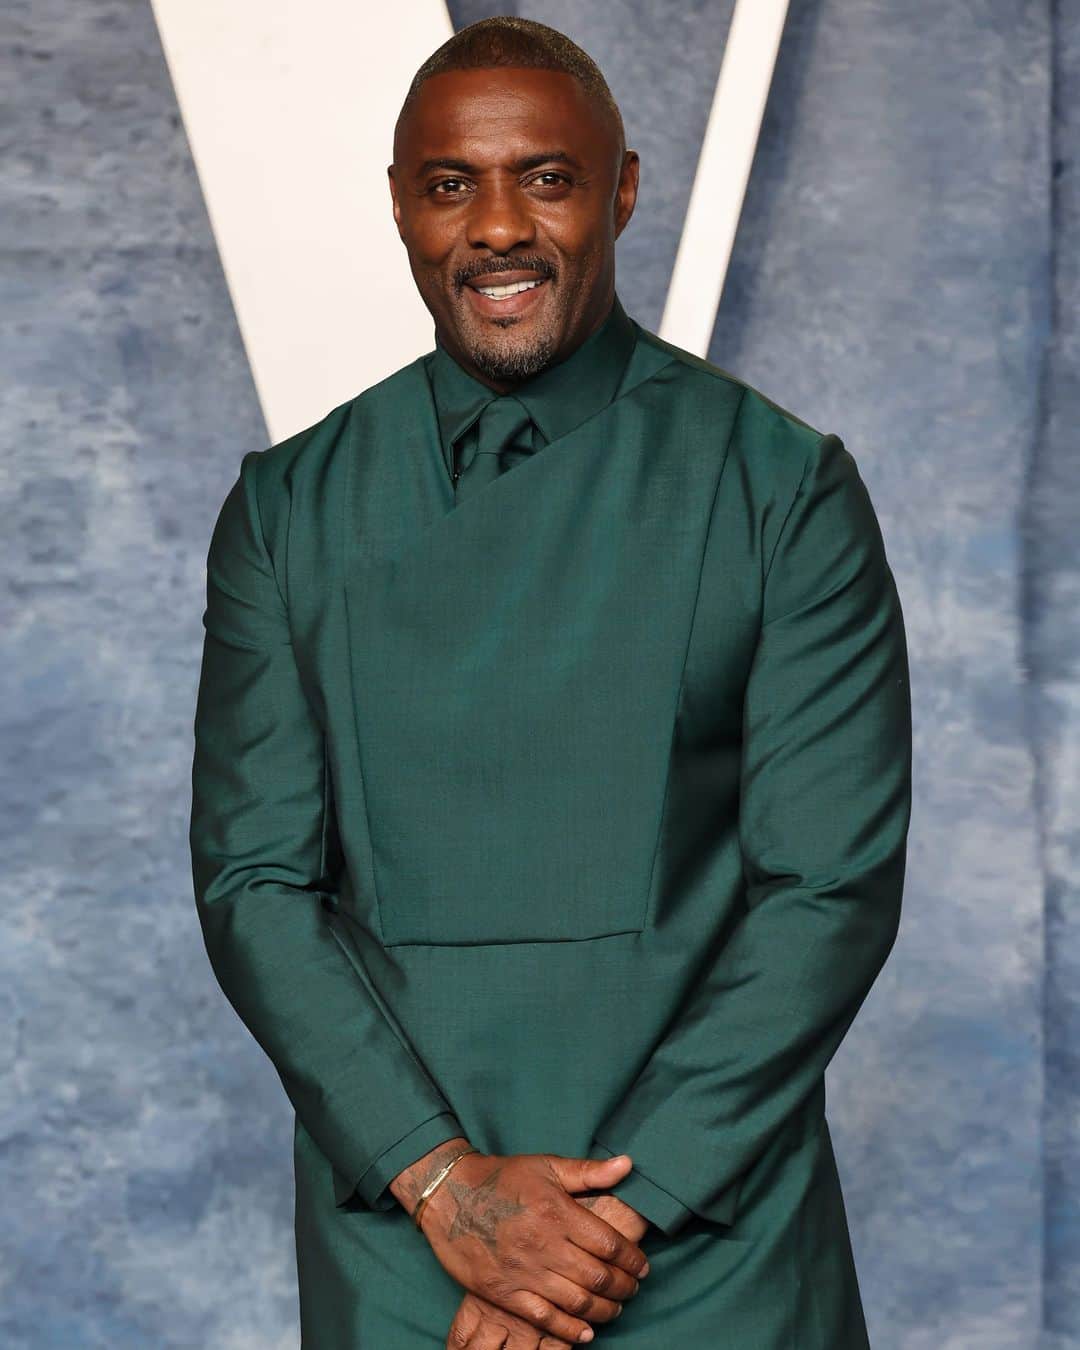 GQのインスタグラム：「At 51, Idris Elba “knows what feels good," which is why he's on a high-protein diet, avoids caffeine, and practices breathwork to chill out his nervous system.   Even though Hollywood was on strike for the bulk of 2023, he’s not letting that get in his way as he looks optimistically into 2024 and beyond. Read more on the actor's real-life diet at the link in bio.」